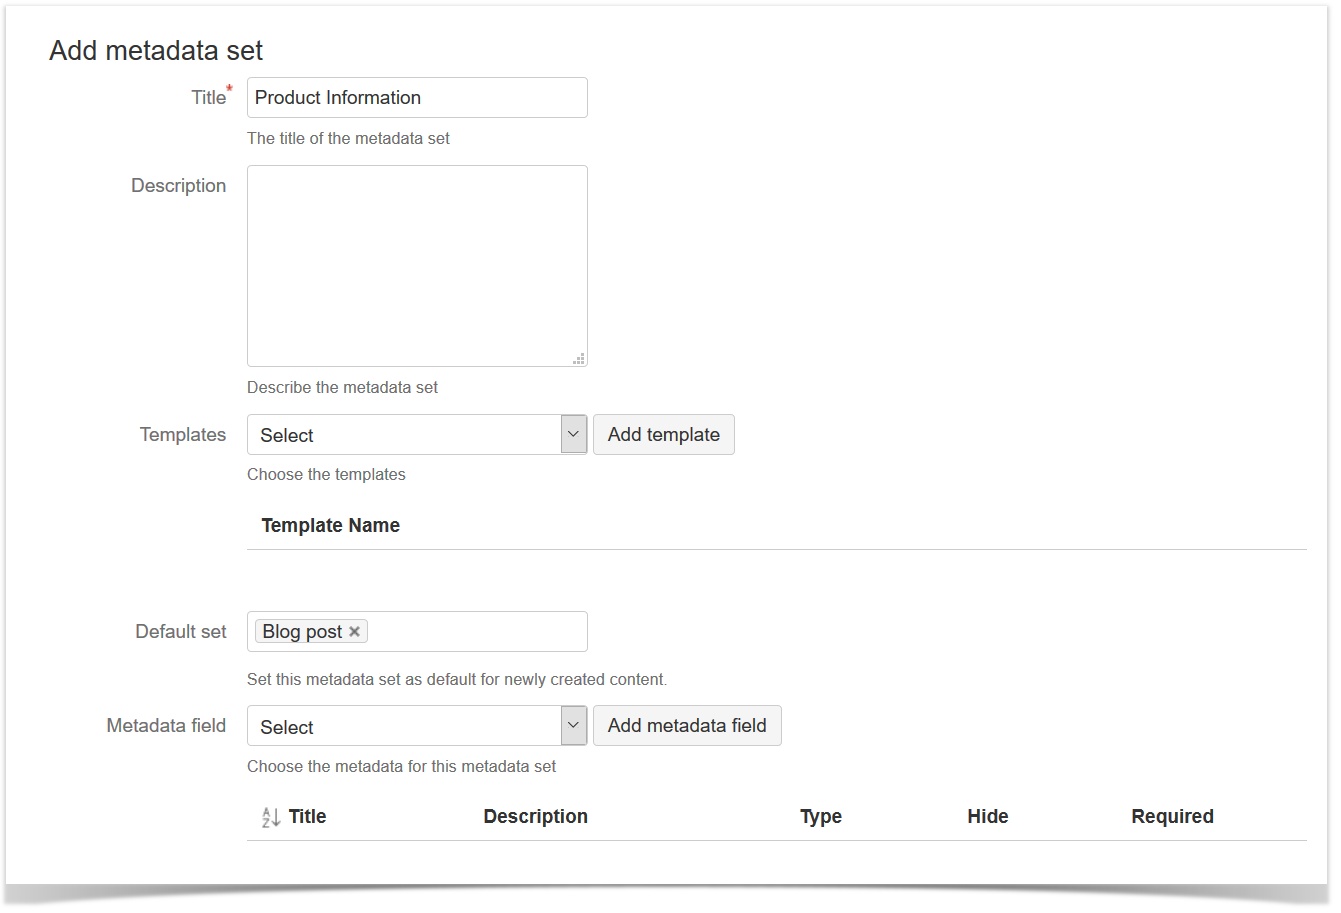 Screenshot of the configuration overview when creating a new metadata set